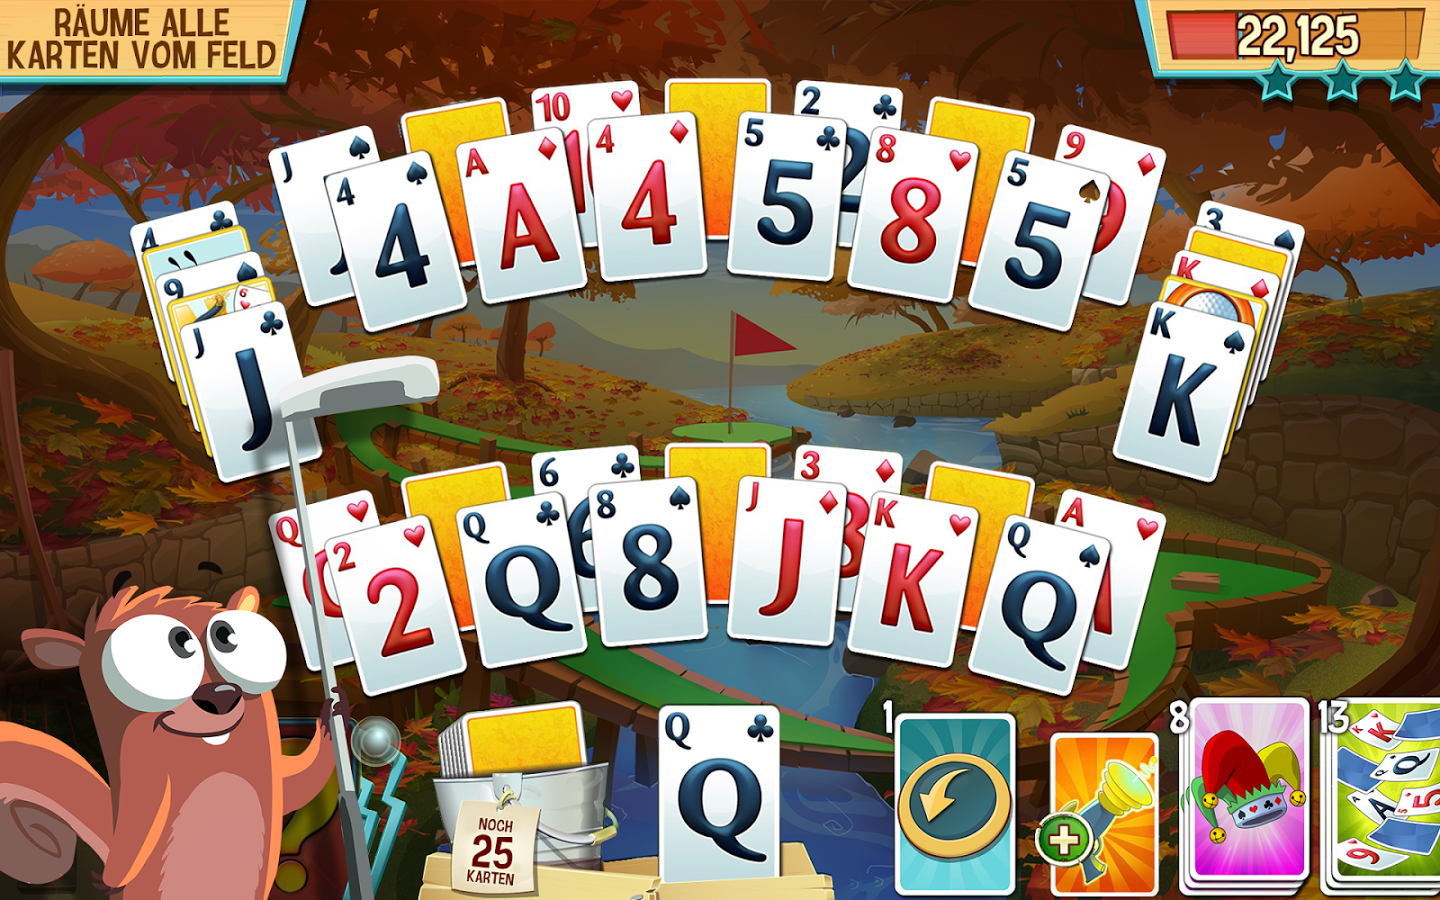 fairway solitaire cheats android